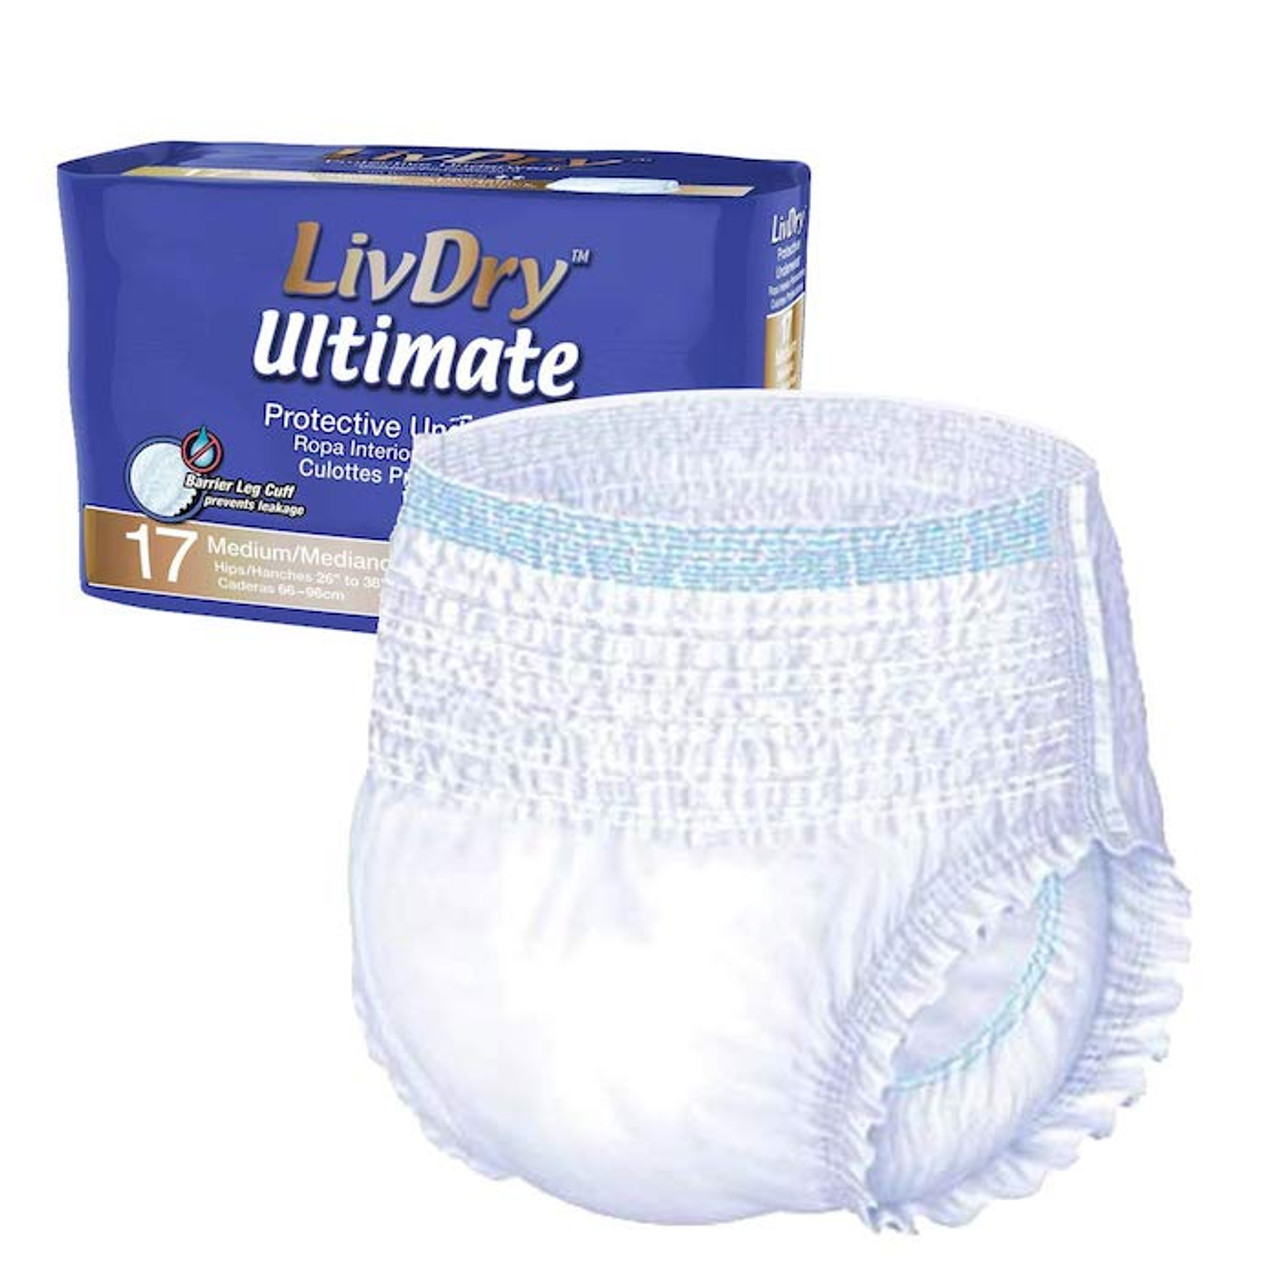 Tranquility Premium OverNight Disposable Absorbent Underwear, Small,  Maximum Protection, 20 ct Bag 